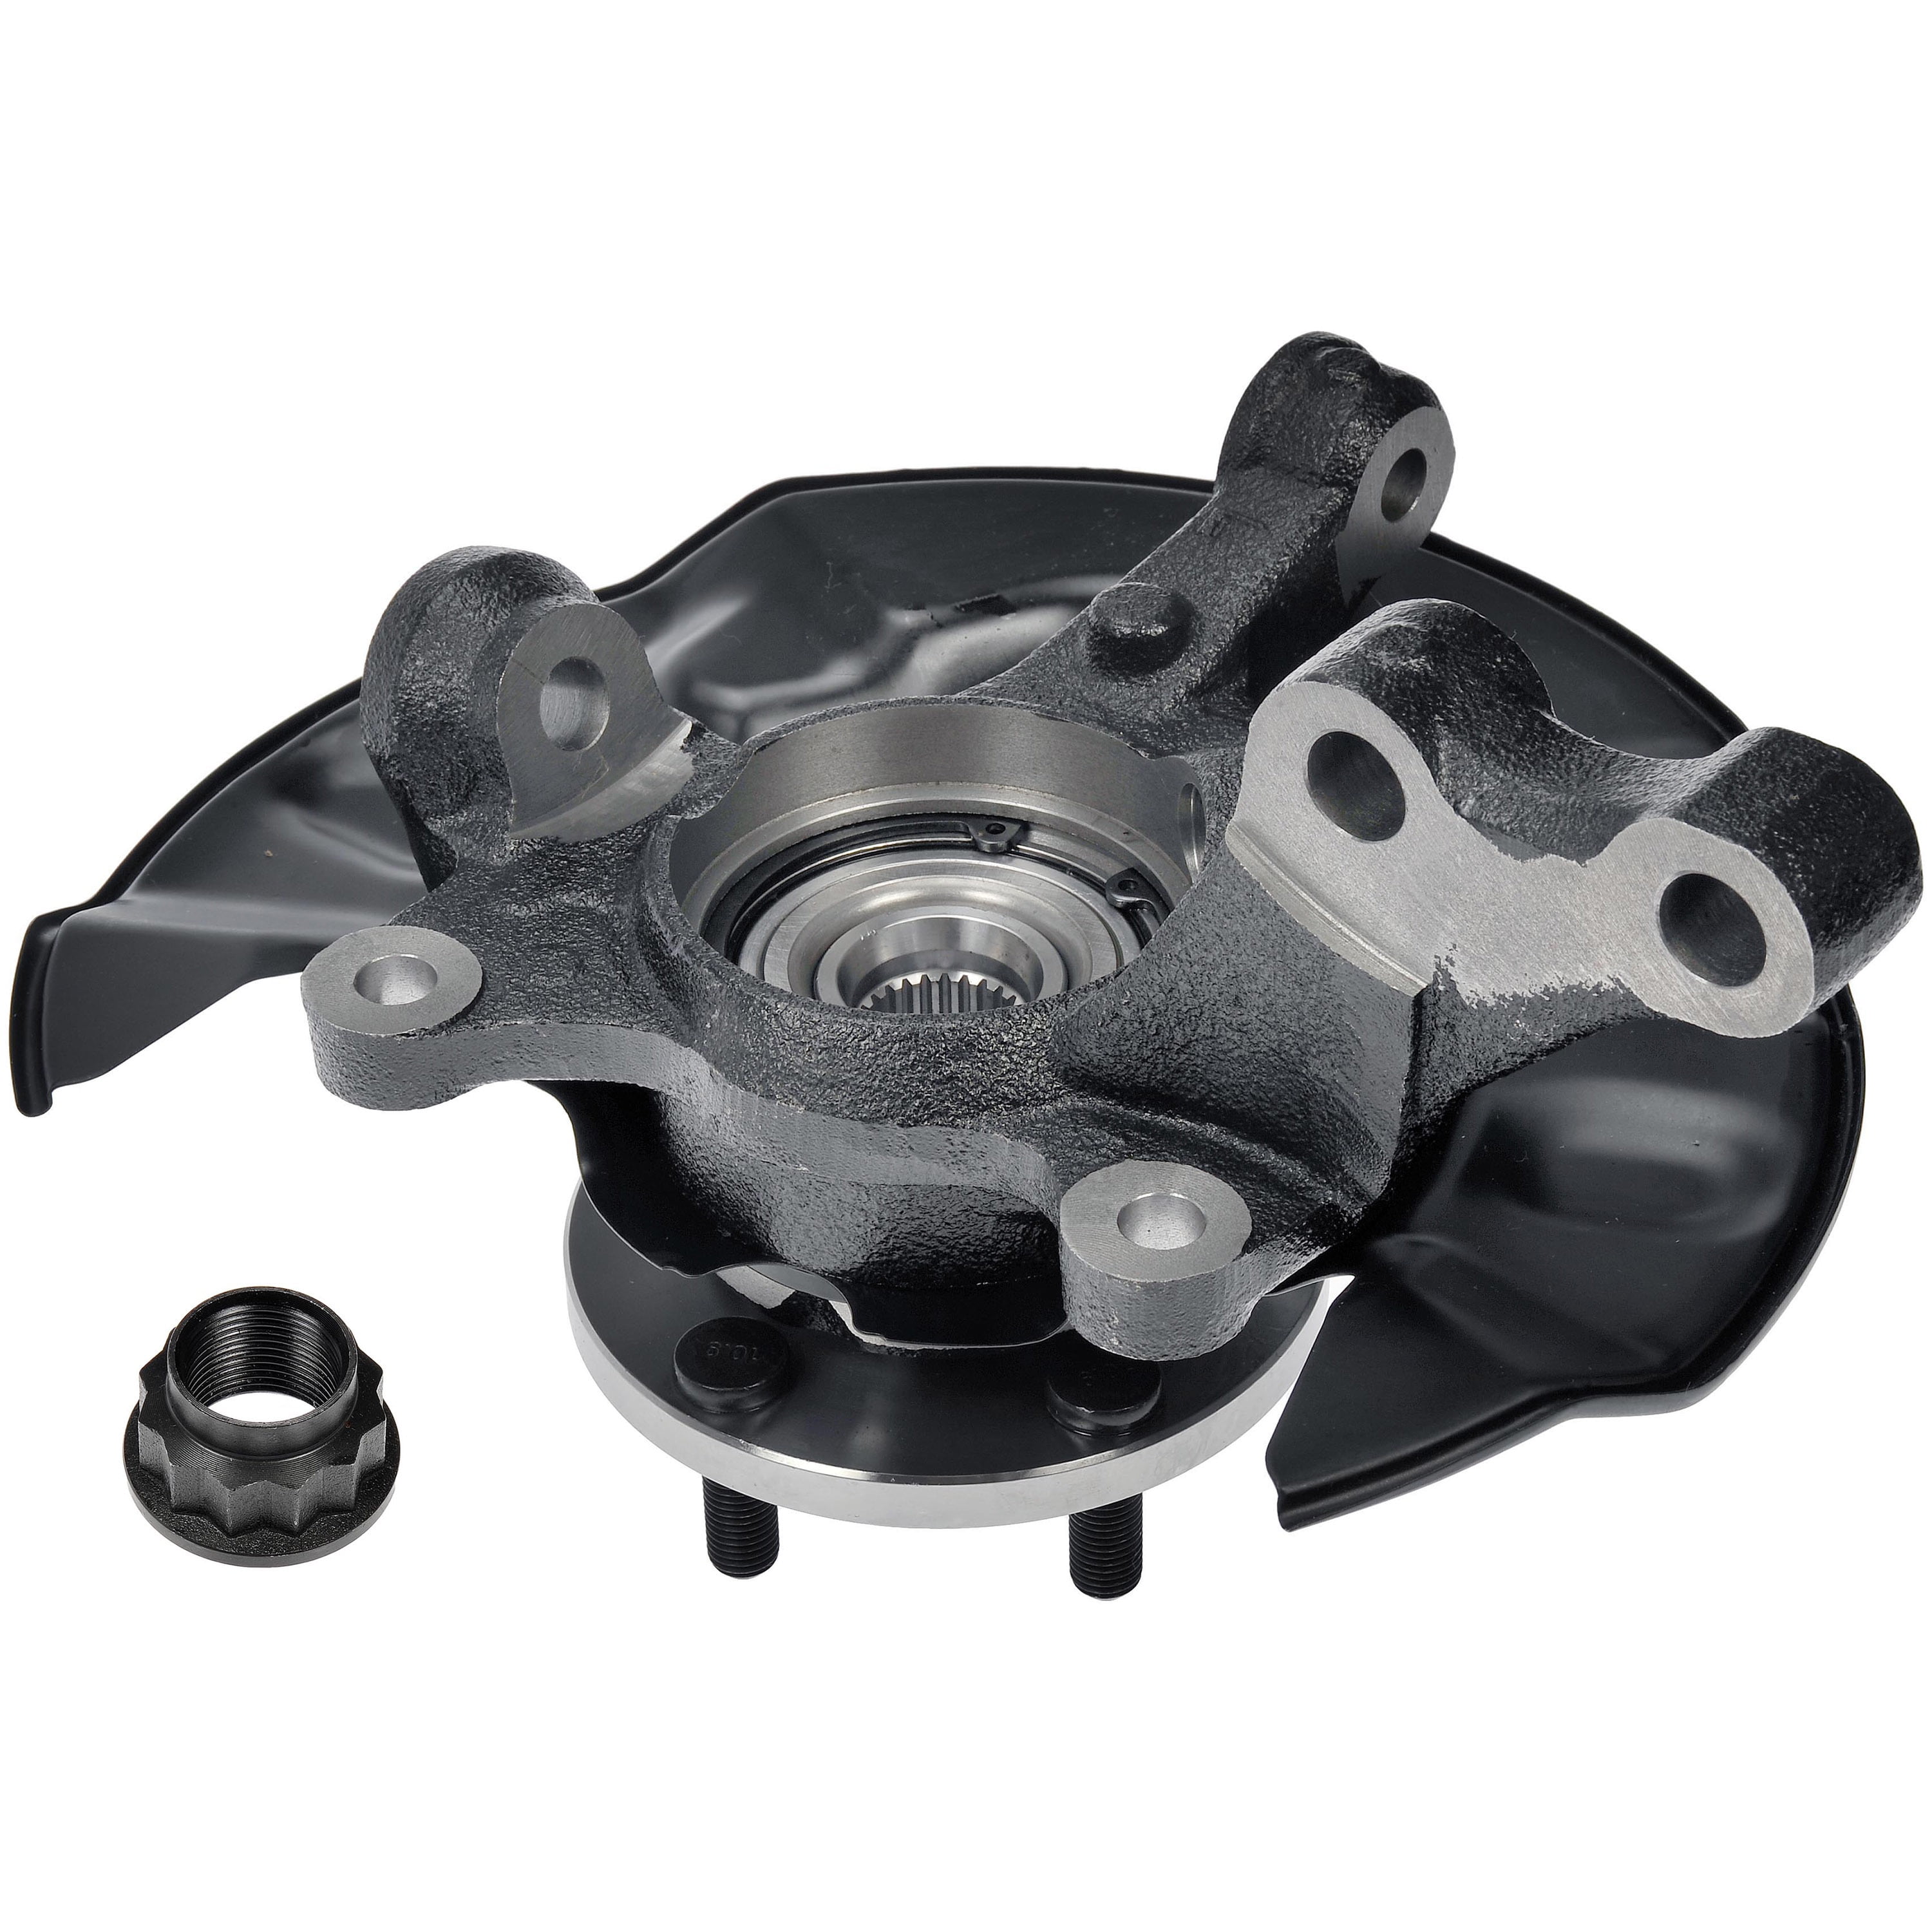 Steering - Knuckle Kit, 698-450, Front Right Loaded Knuckle